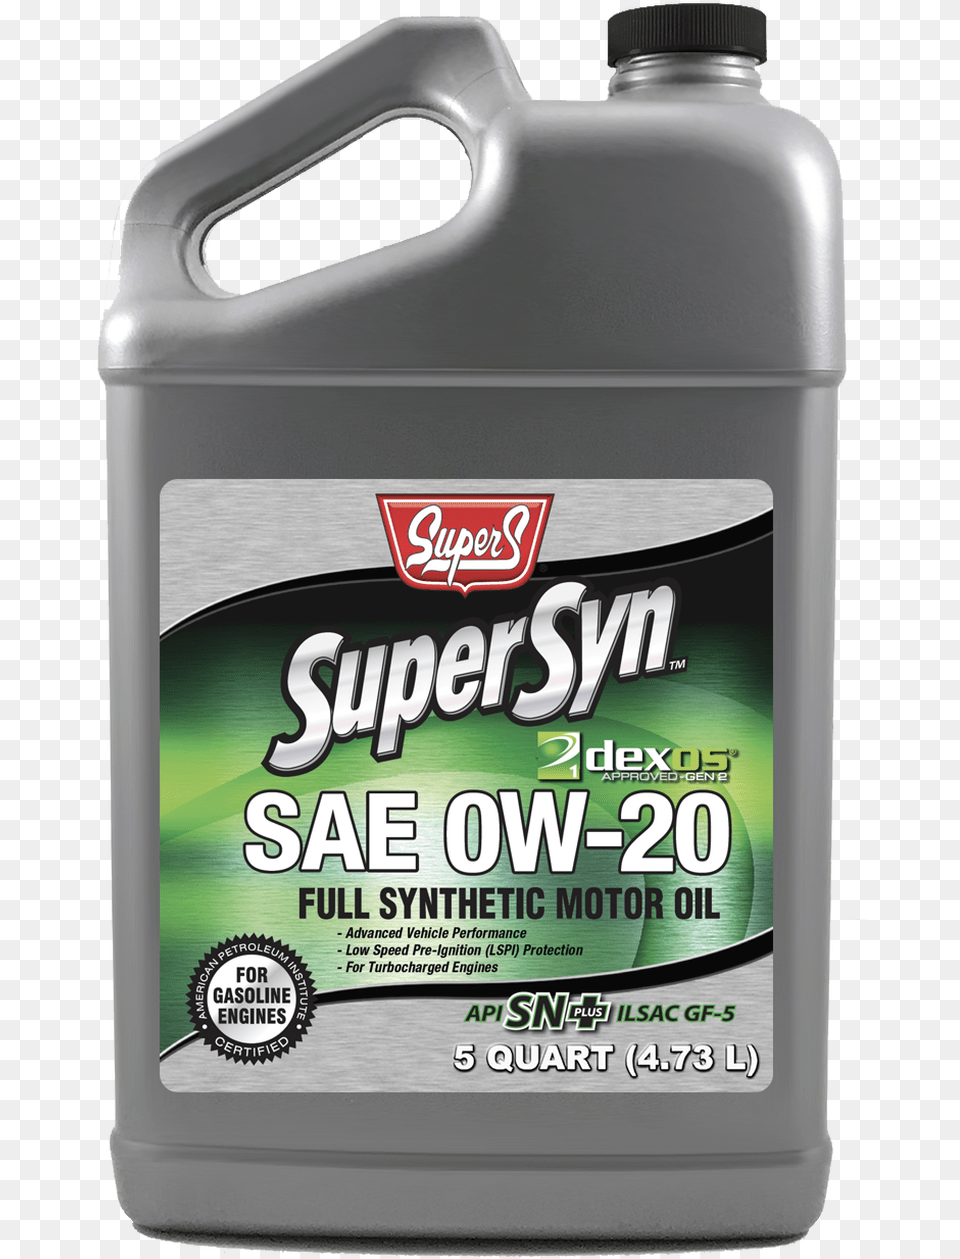 Super S Supersyn Dexos1 Gen2 Full Synthetic Sae 0w Leather Png Image